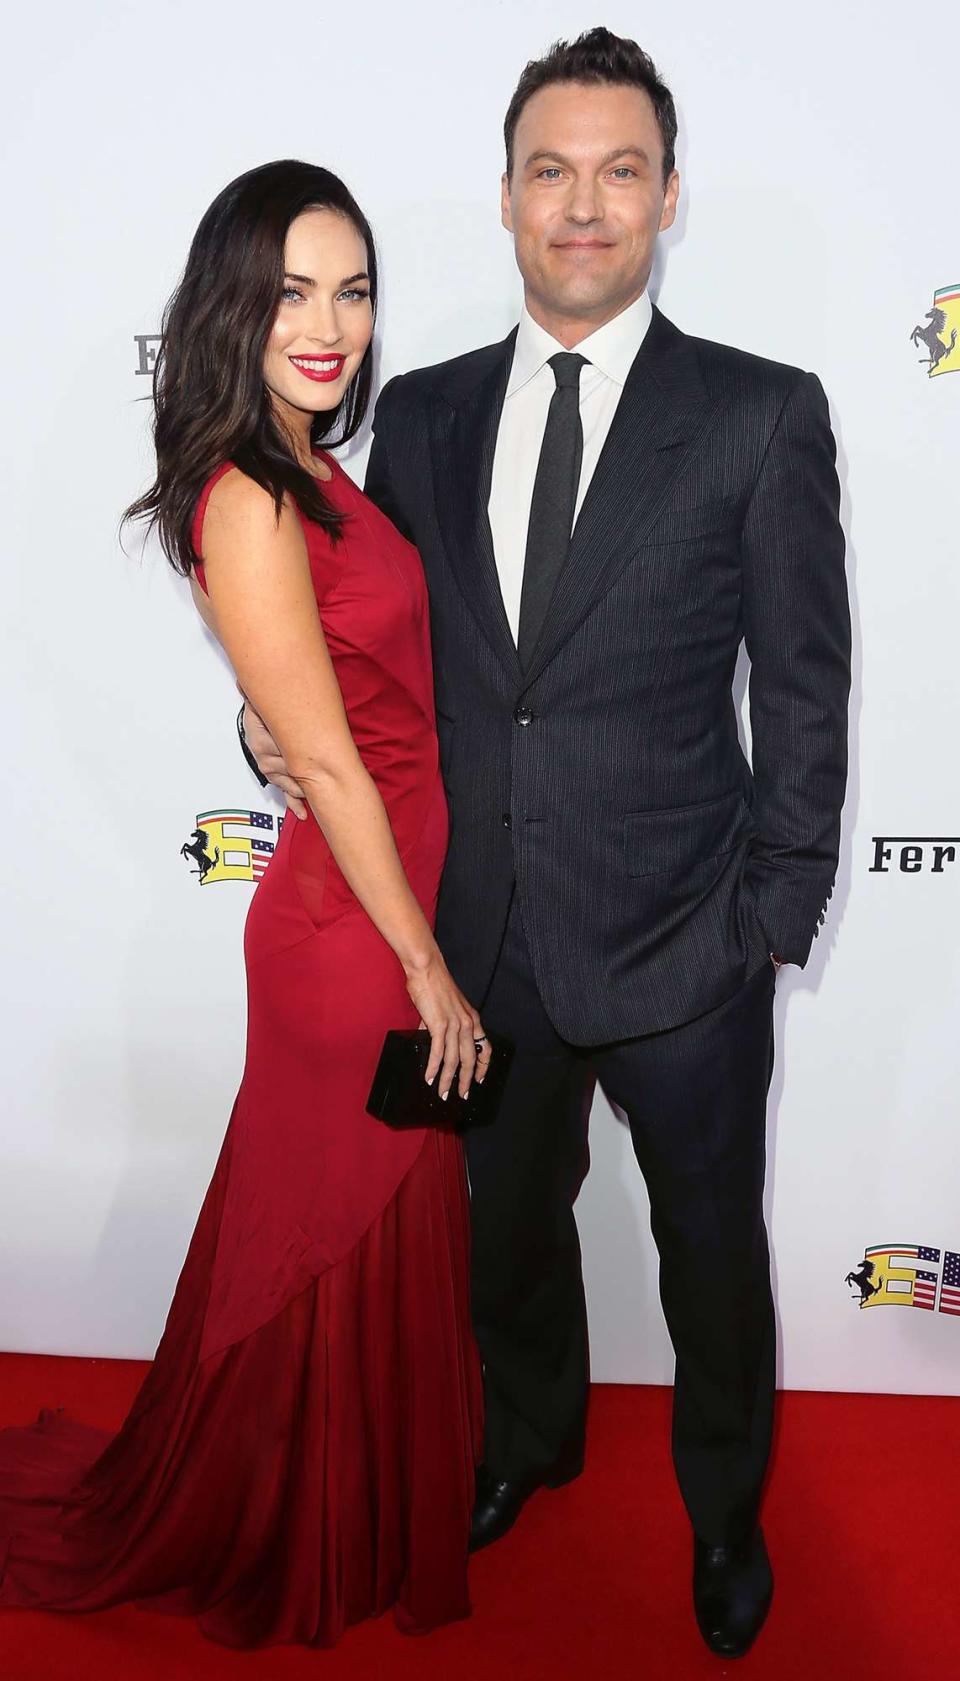 Megan Fox (L) and husband actor Brian Austin Green attend Ferrari's 60th Anniversary in the USA Gala at the Wallis Annenberg Center for the Performing Arts on October 11, 2014 in Beverly Hills, California